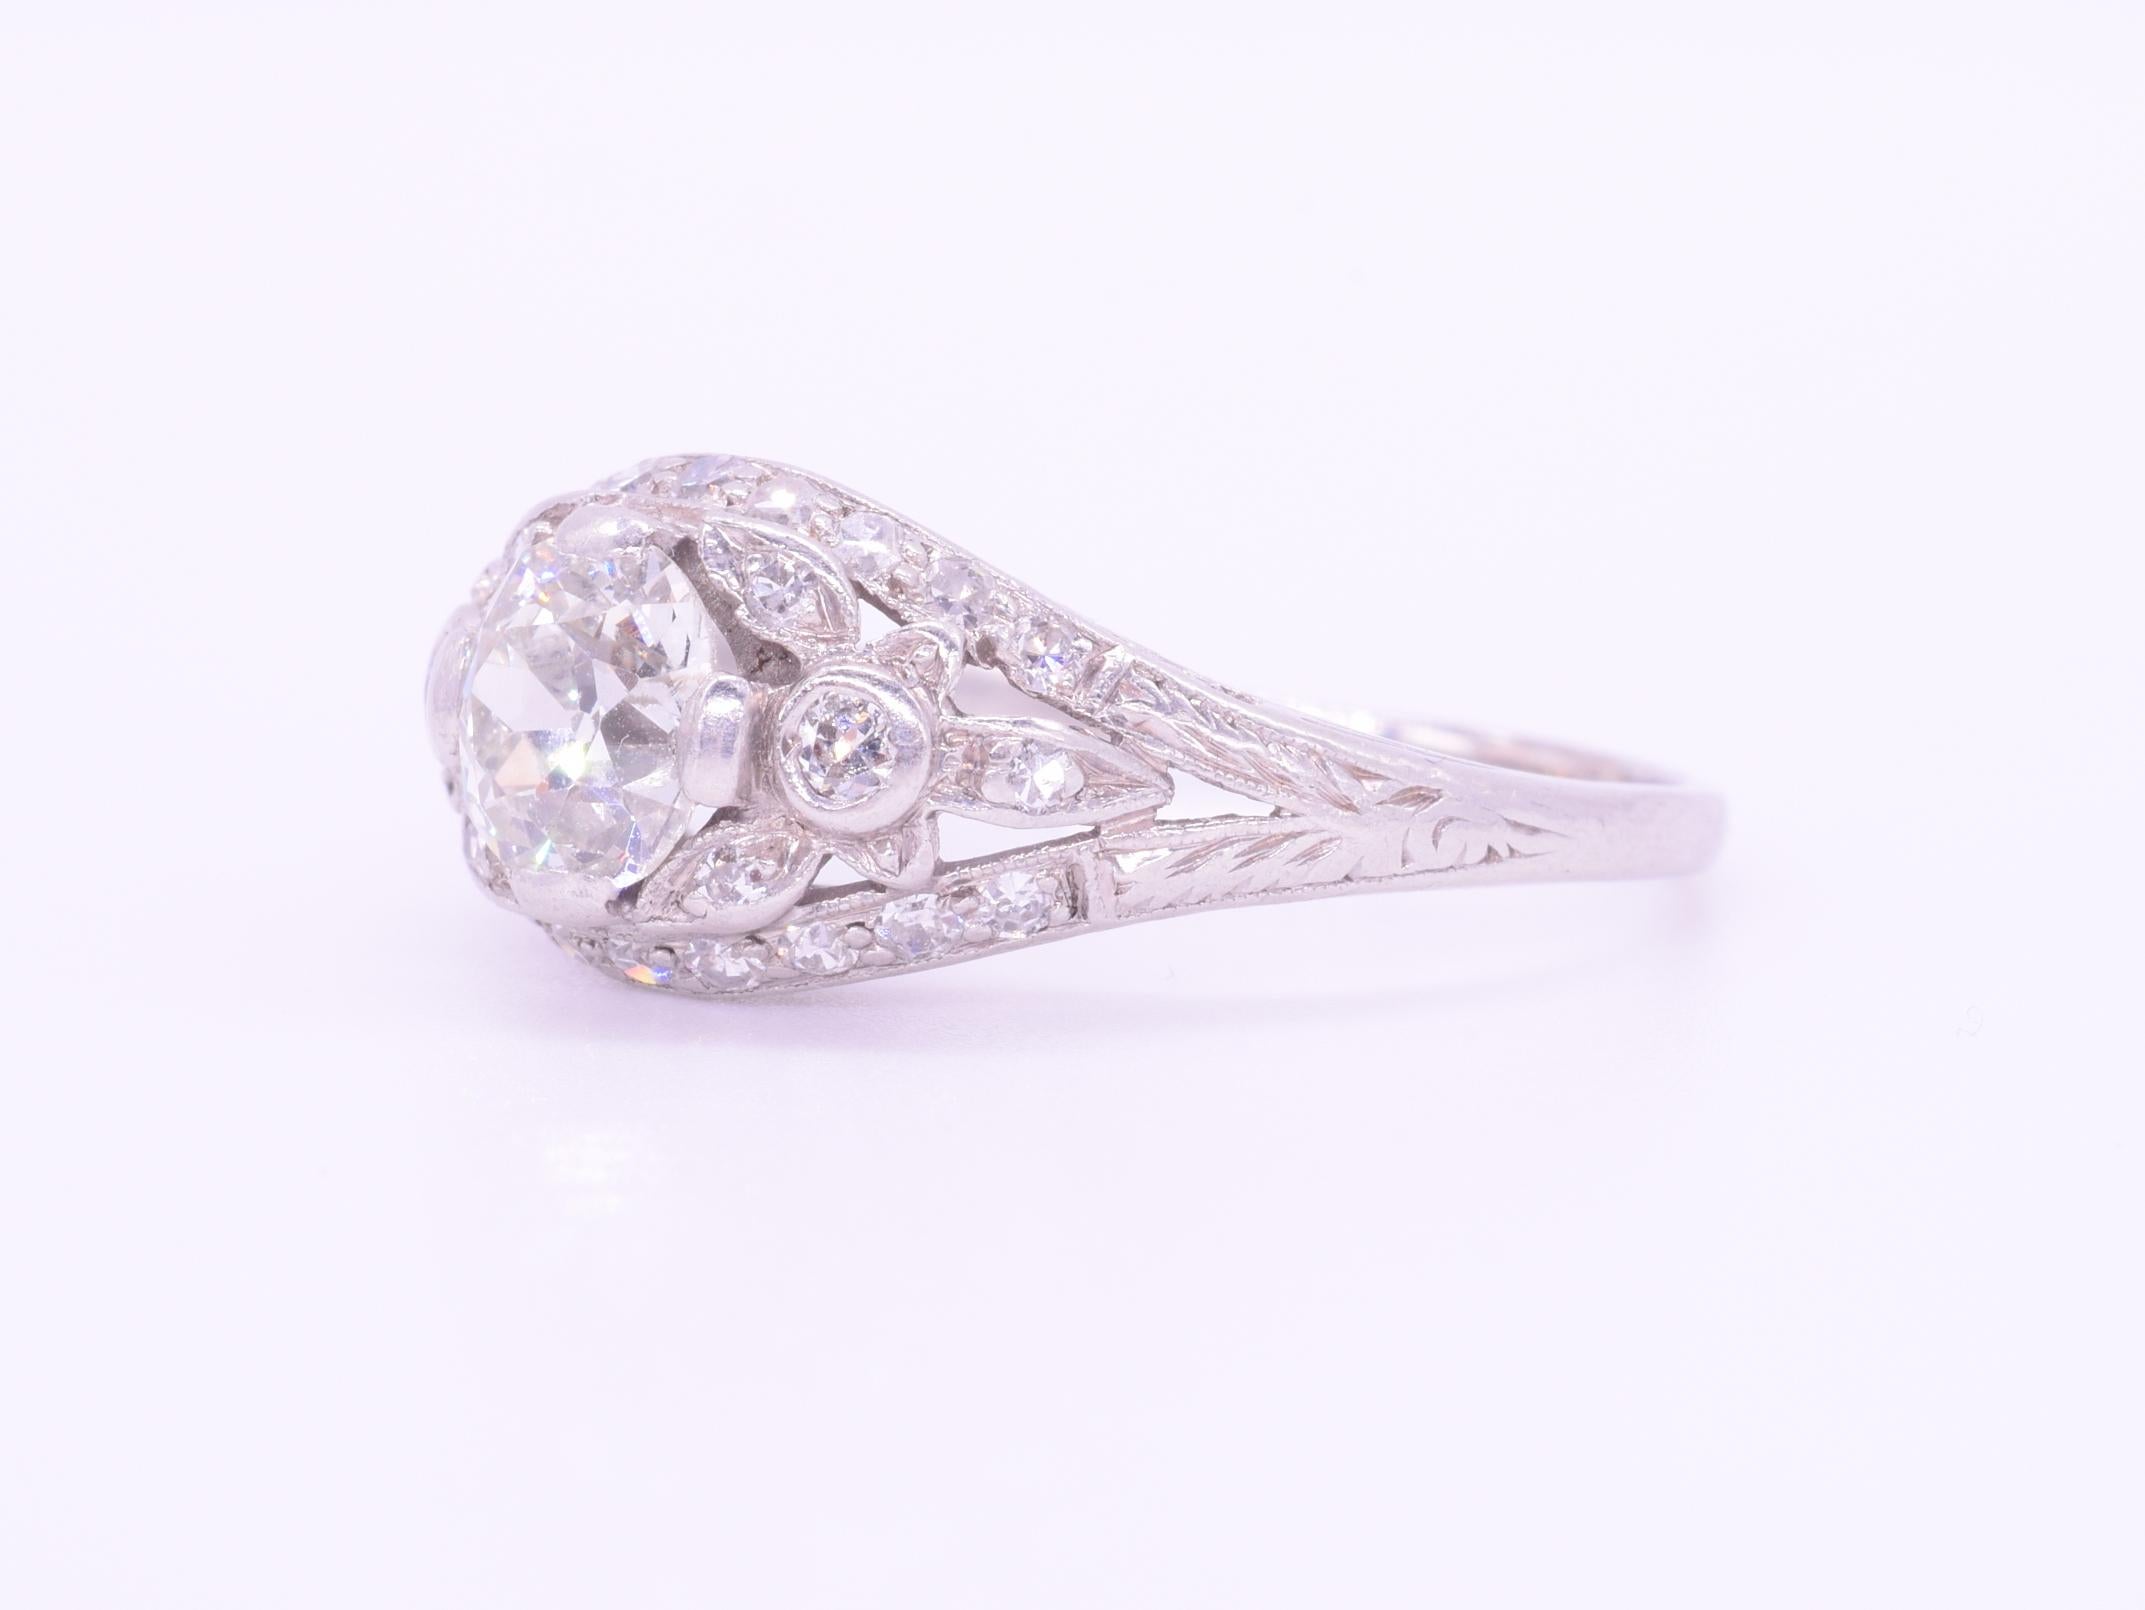 An old European cut diamond weighing approximately 1ct, of approximately  I-J color and SI clarity, is accented with a floral motif set with single cut diamonds totaling approximately  0.35ct mounted in platinum. Current ring size 8.75.